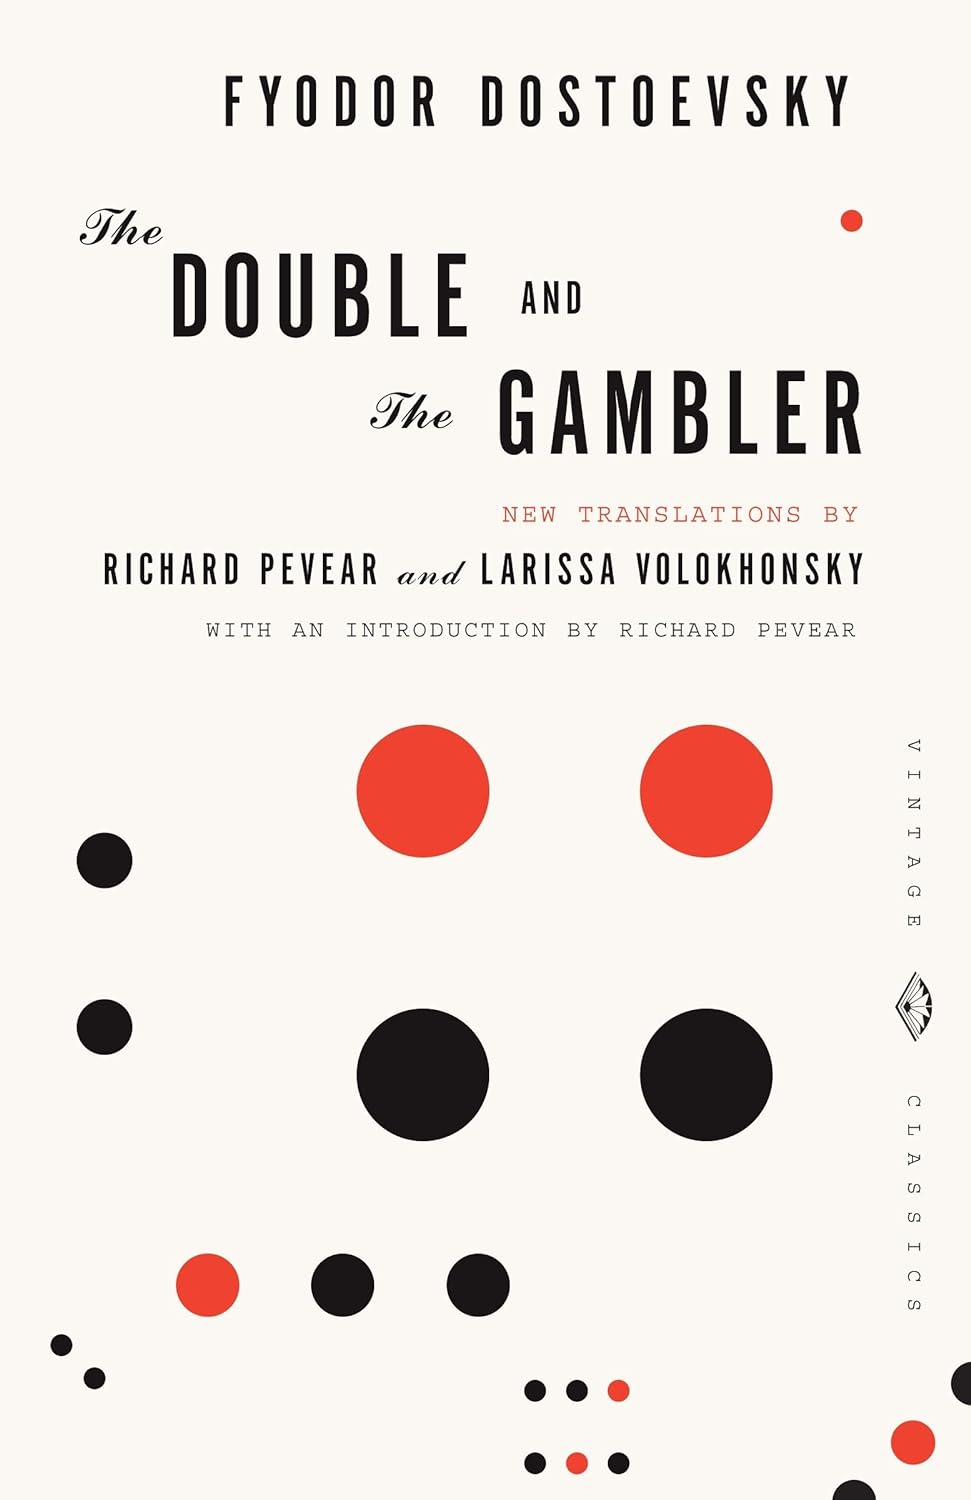 The Double and The Gambler by Fyodor Dostoevsky